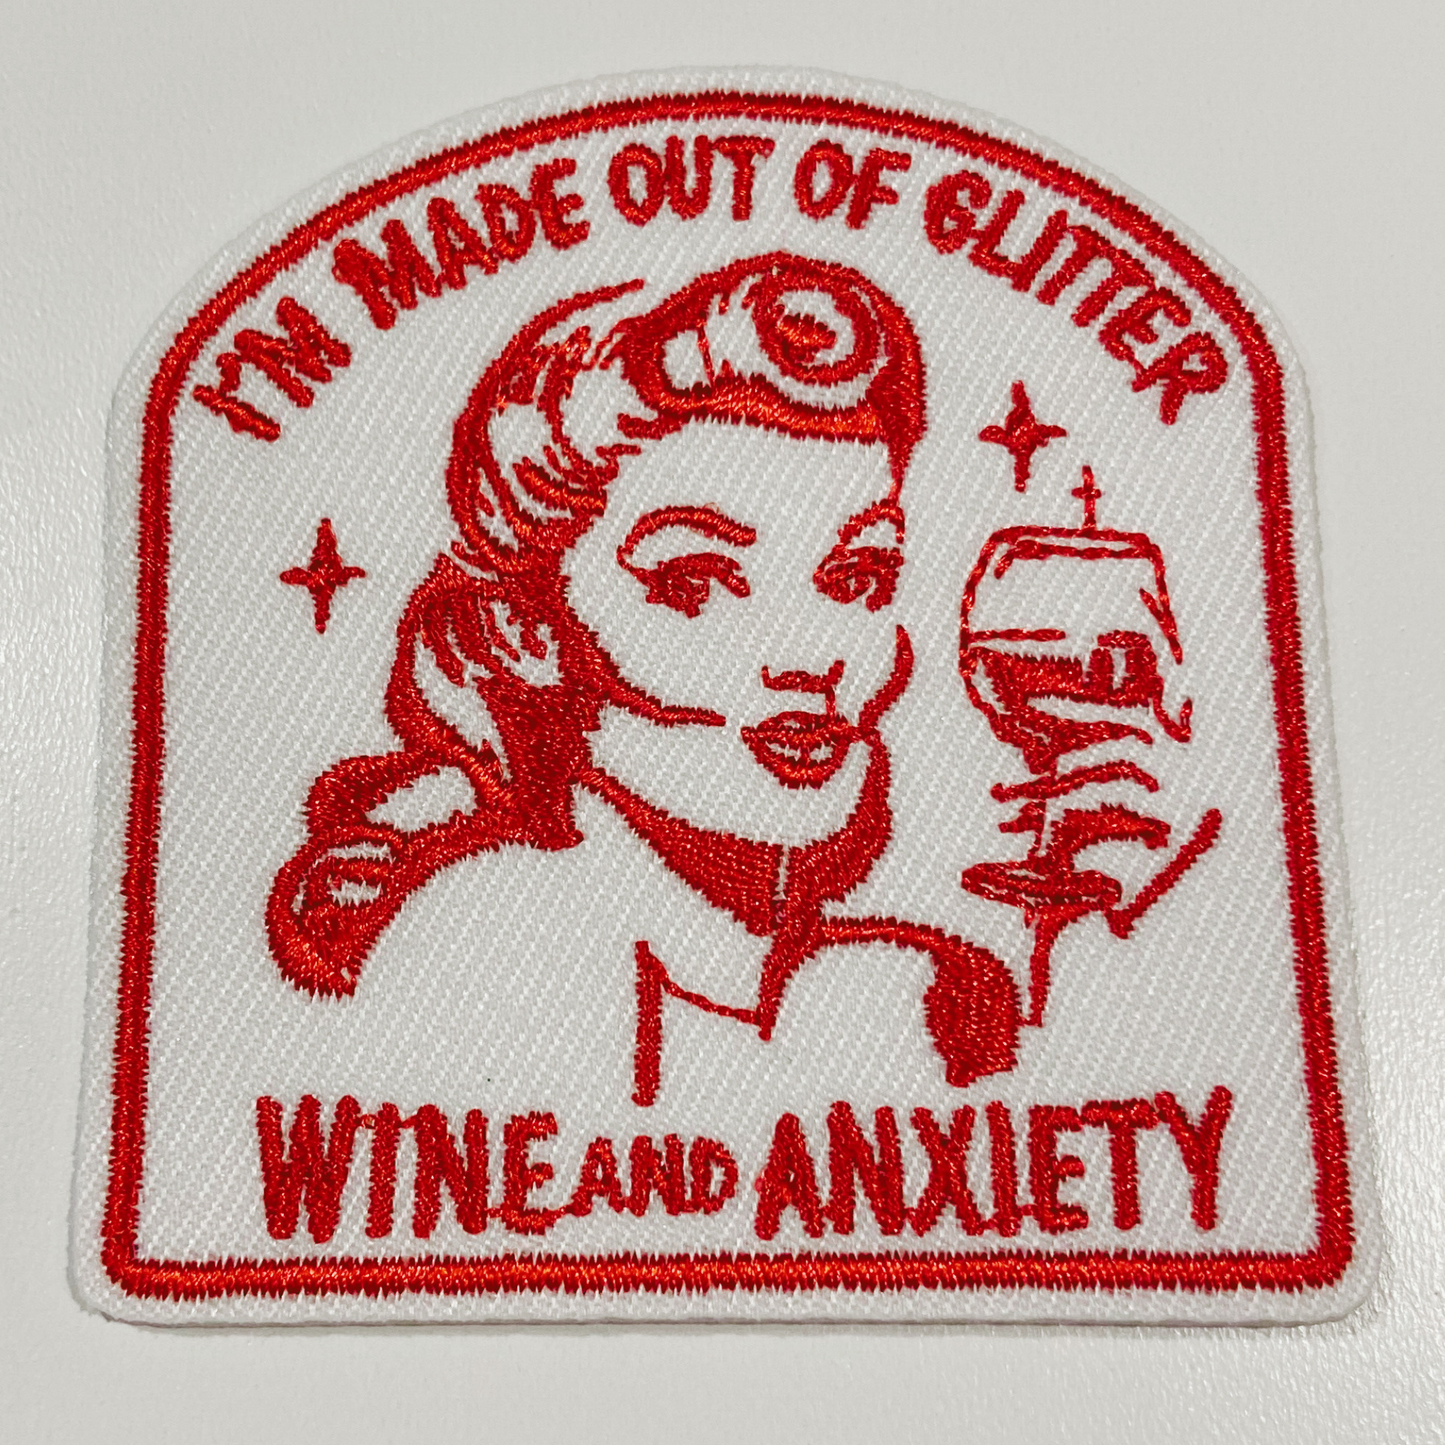 3" I'm Made Out Of Glitter Wine and Anxiety   - Embroidered Hat Patch